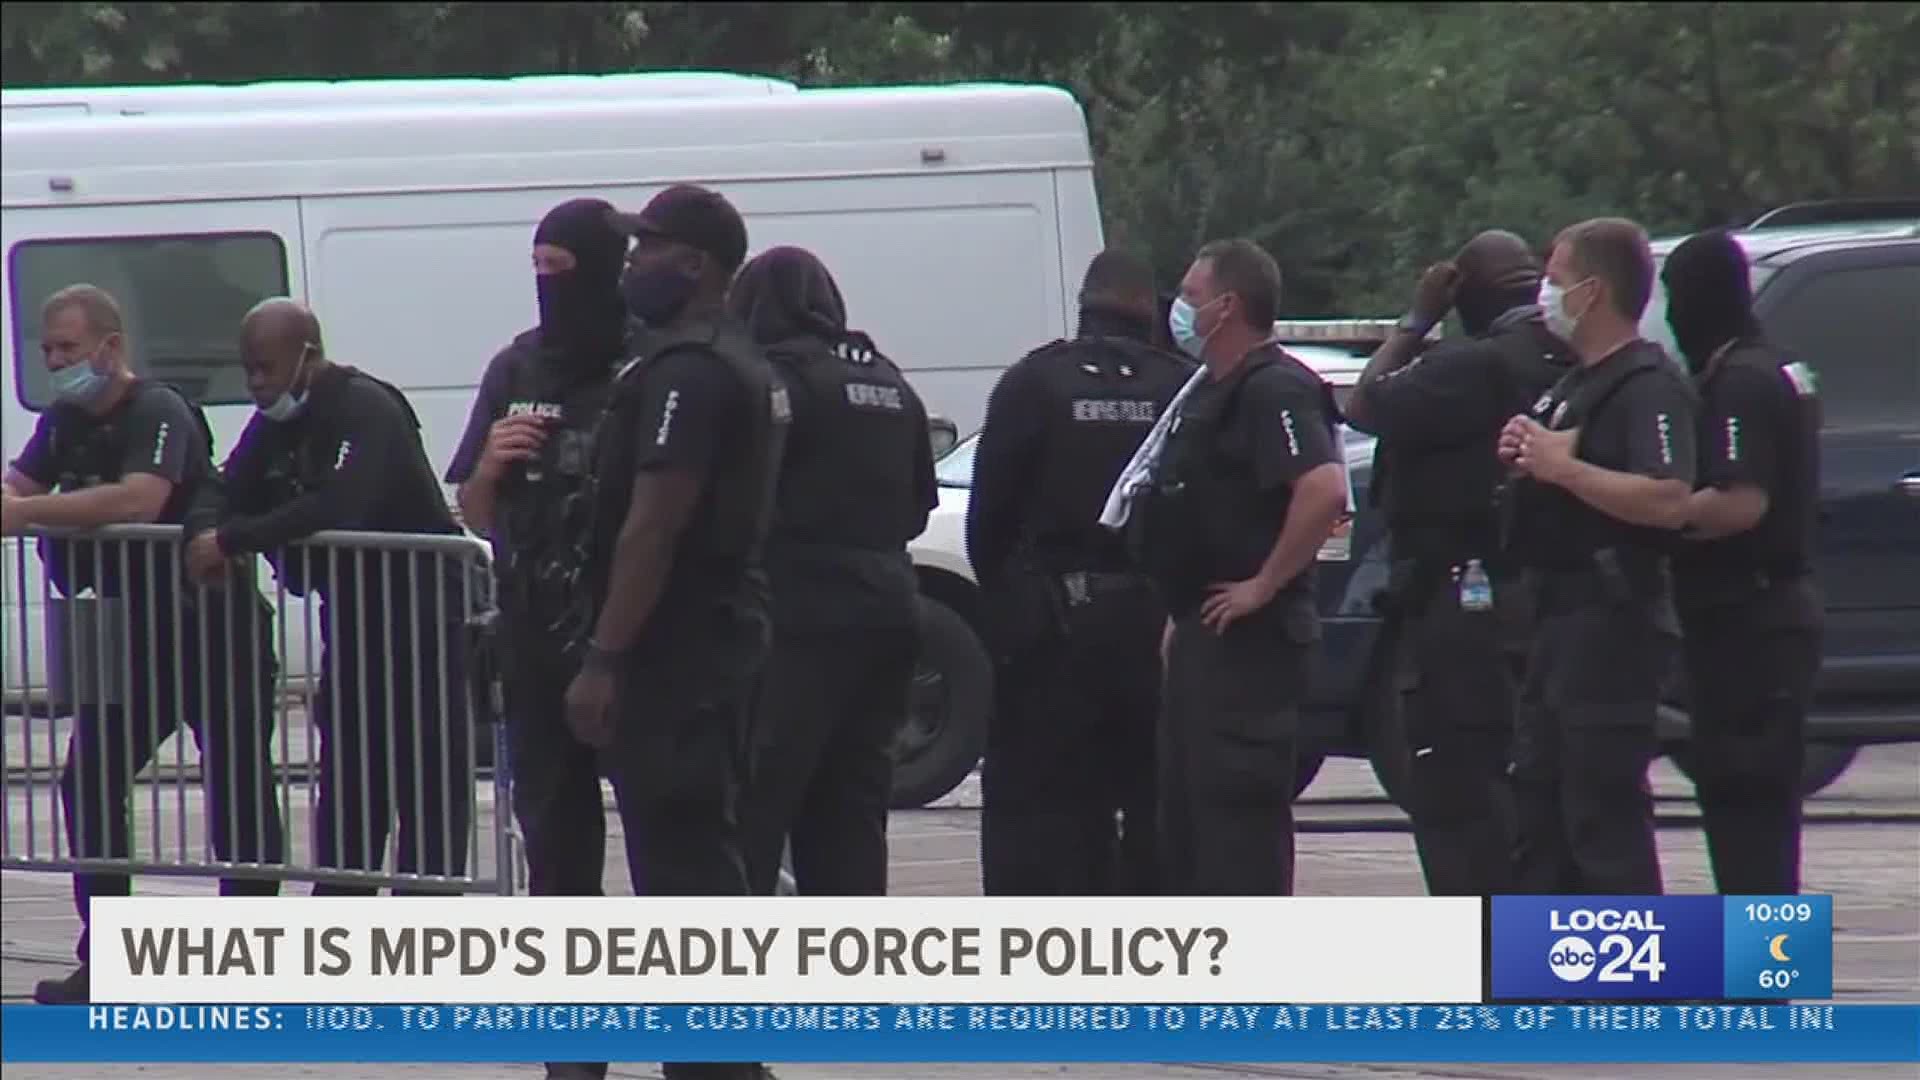 One type of force is "never" to be used by officers according to MPD.